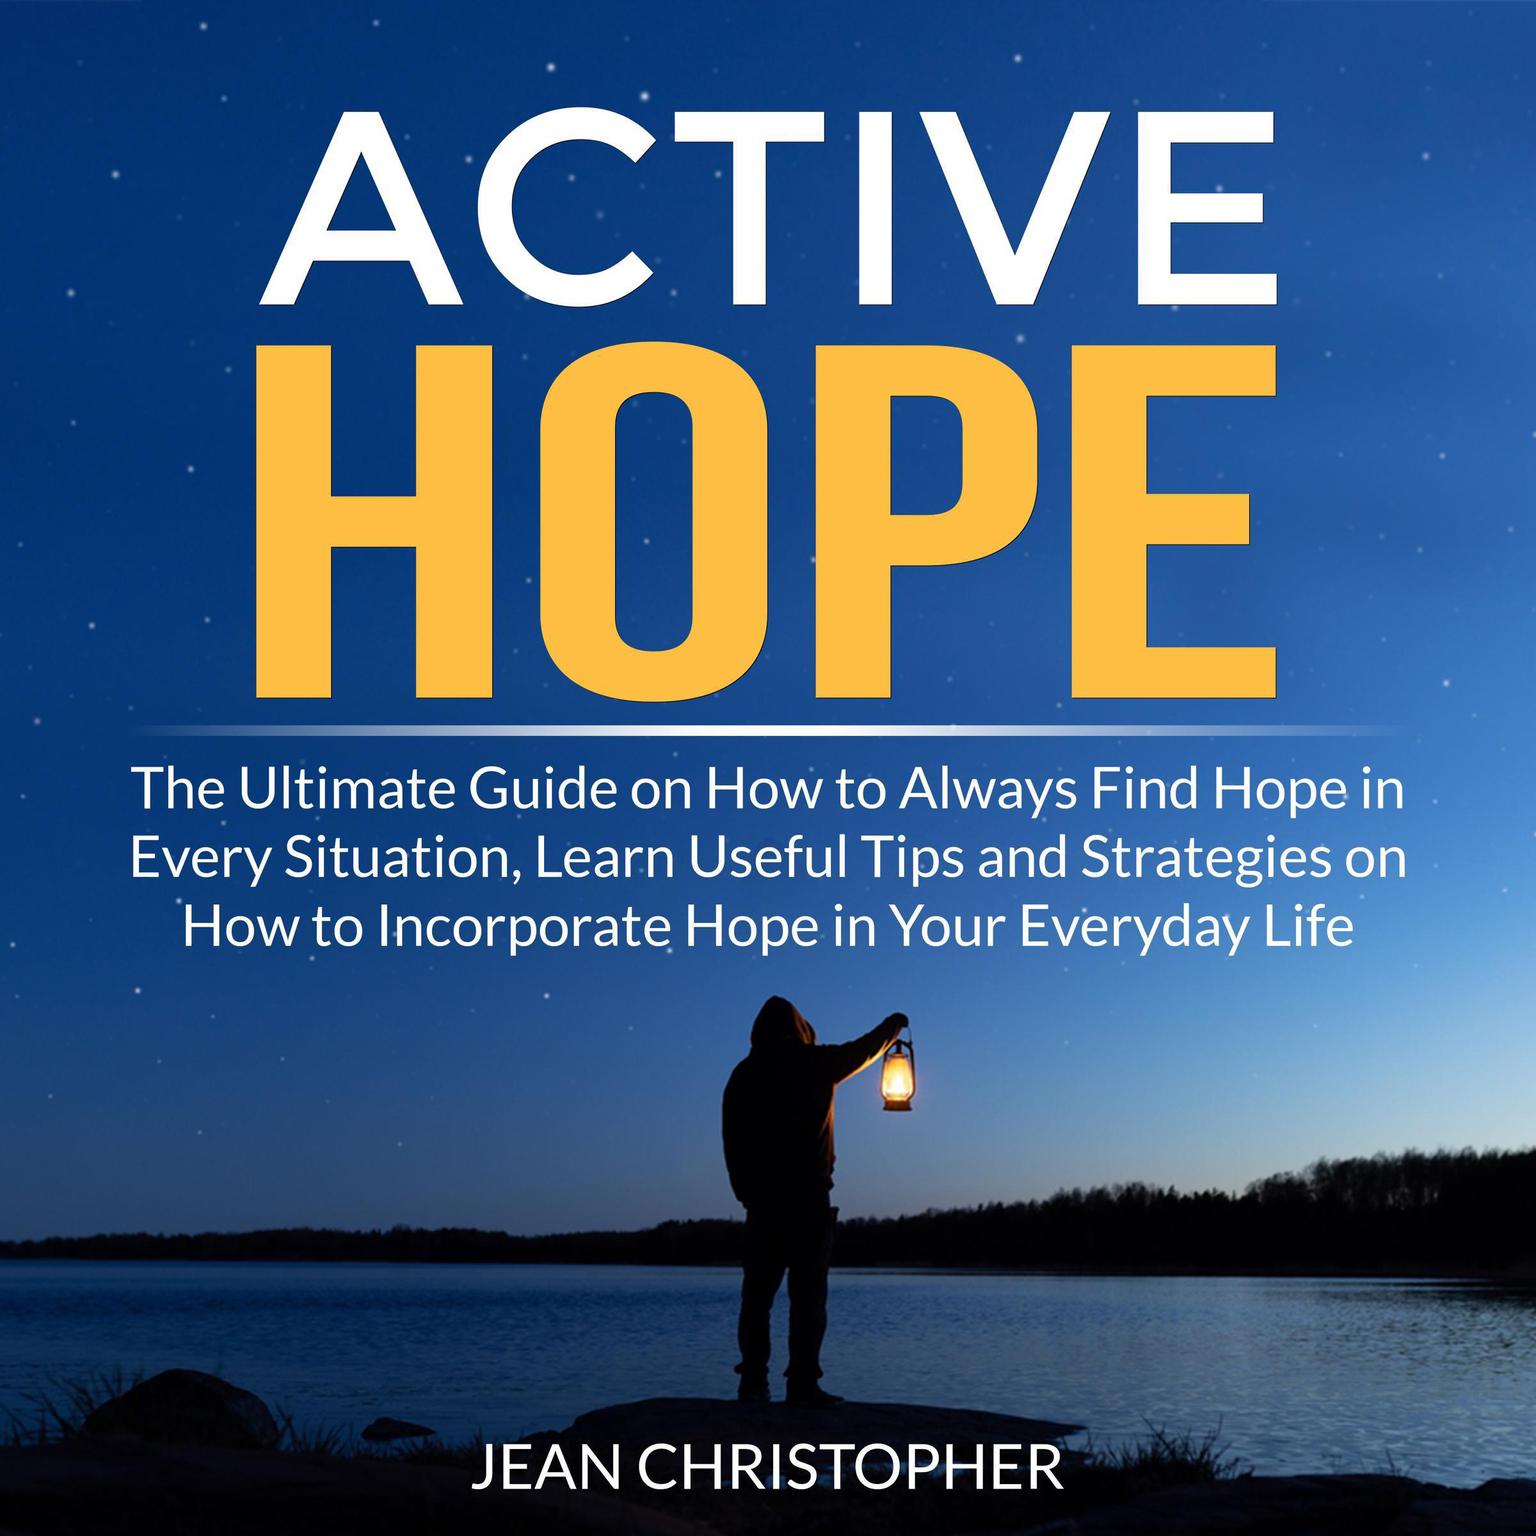 Active Hope: The Ultimate Guide on How to Always Find Hope in Every Situation, Learn Useful Tips and Strategies on How to Incorporate Hope in Your Everyday Life Audiobook, by Jean Chrisopher